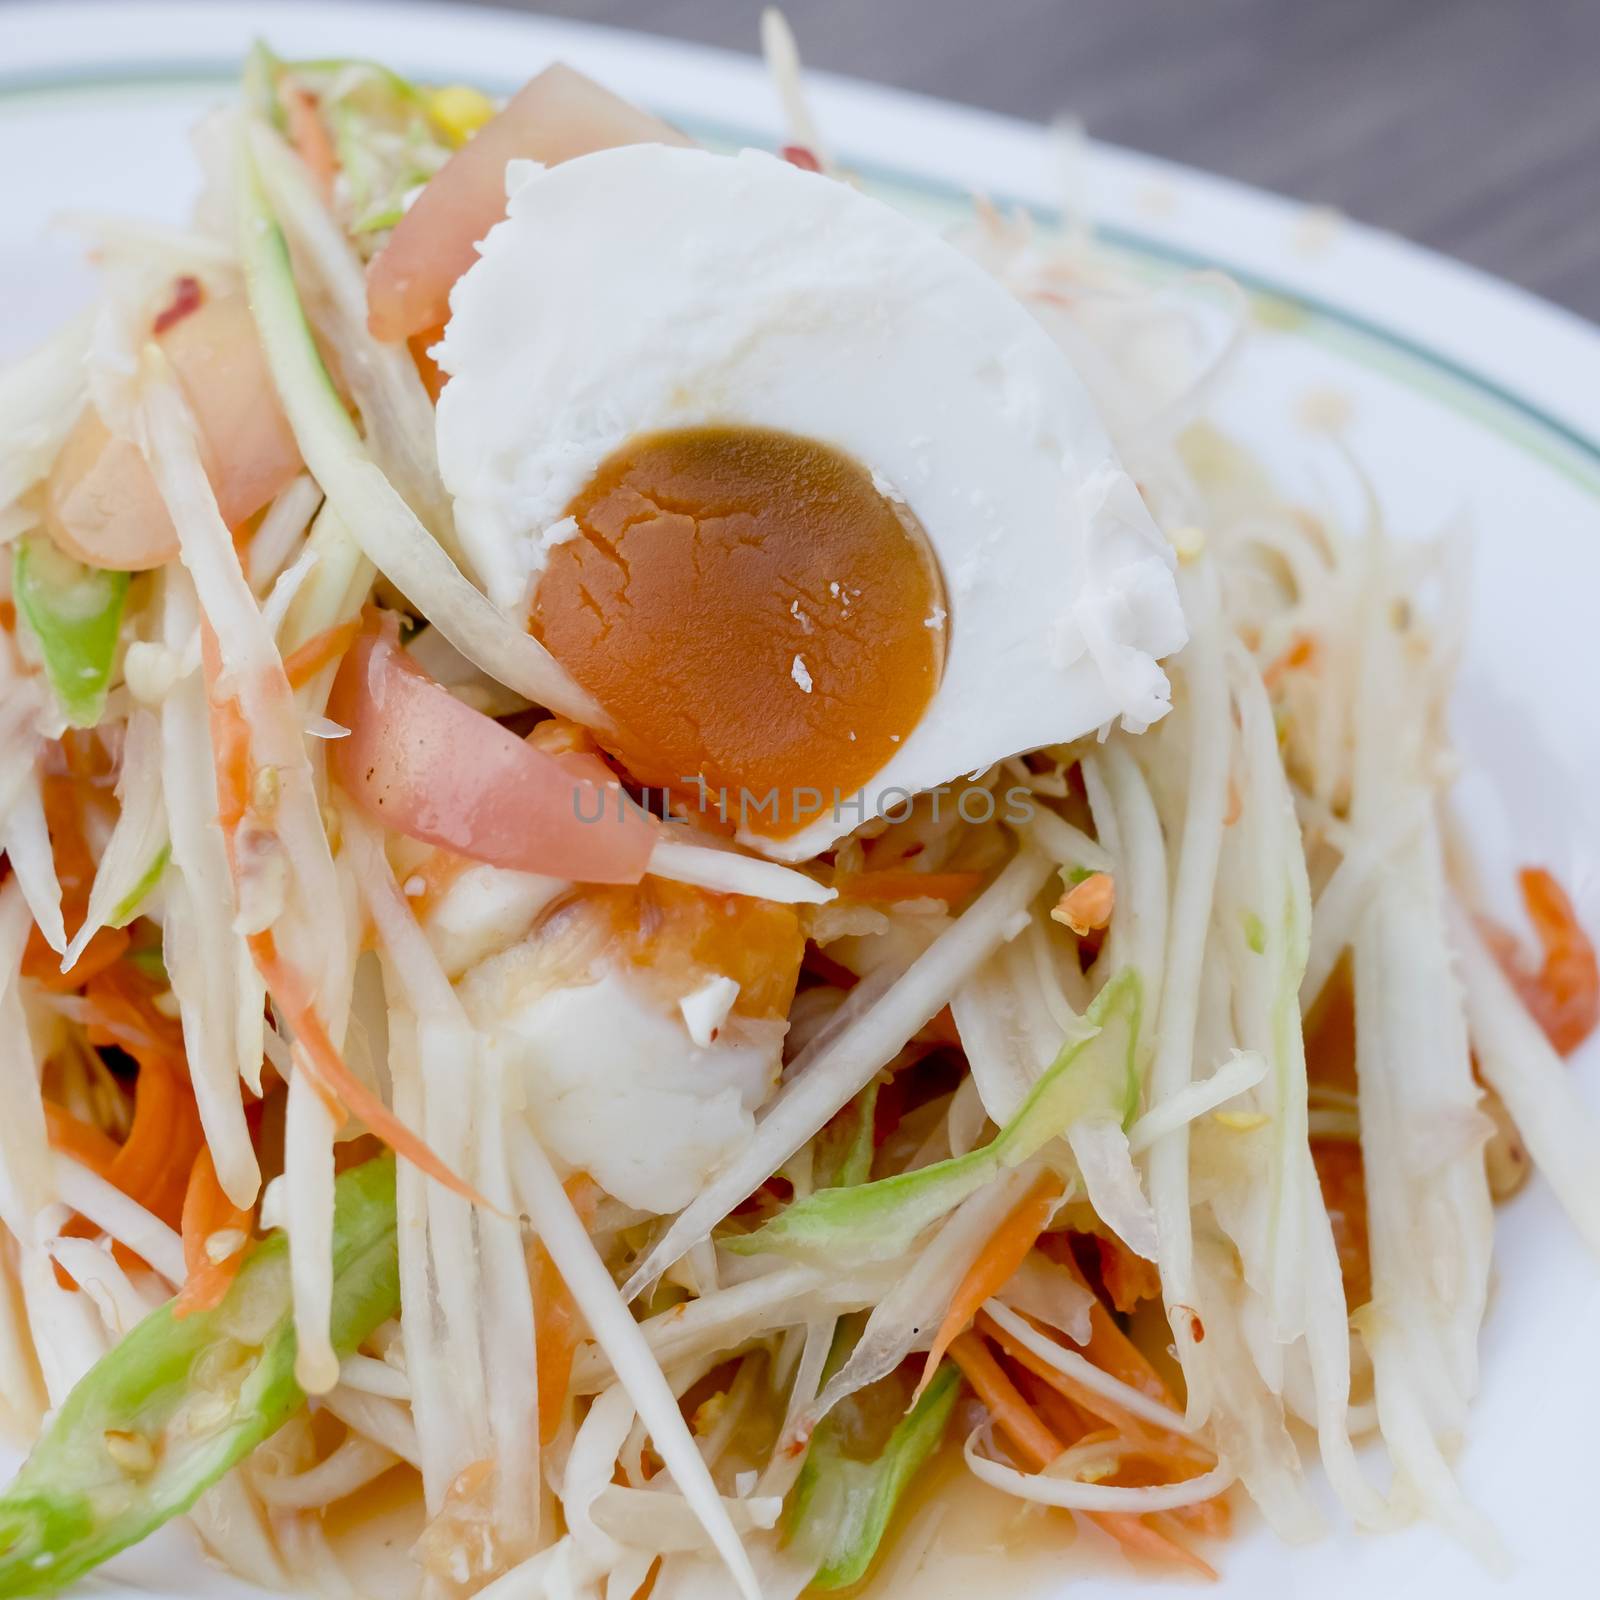 Famous Thai food, Papaya salad with salted egg or what we called by art9858